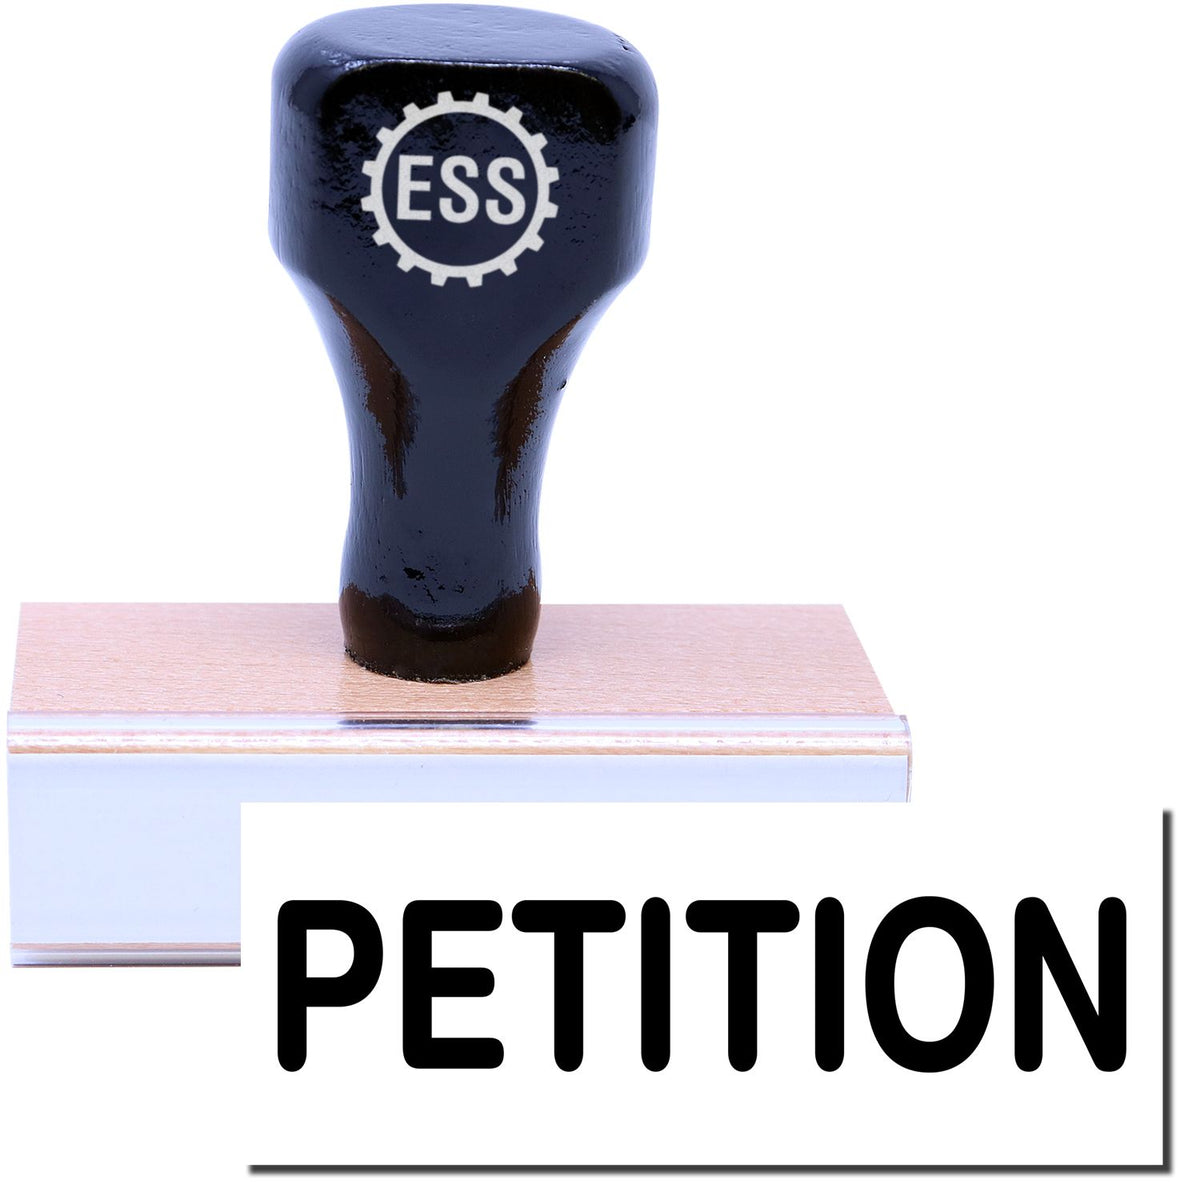 Petition Rubber Stamp